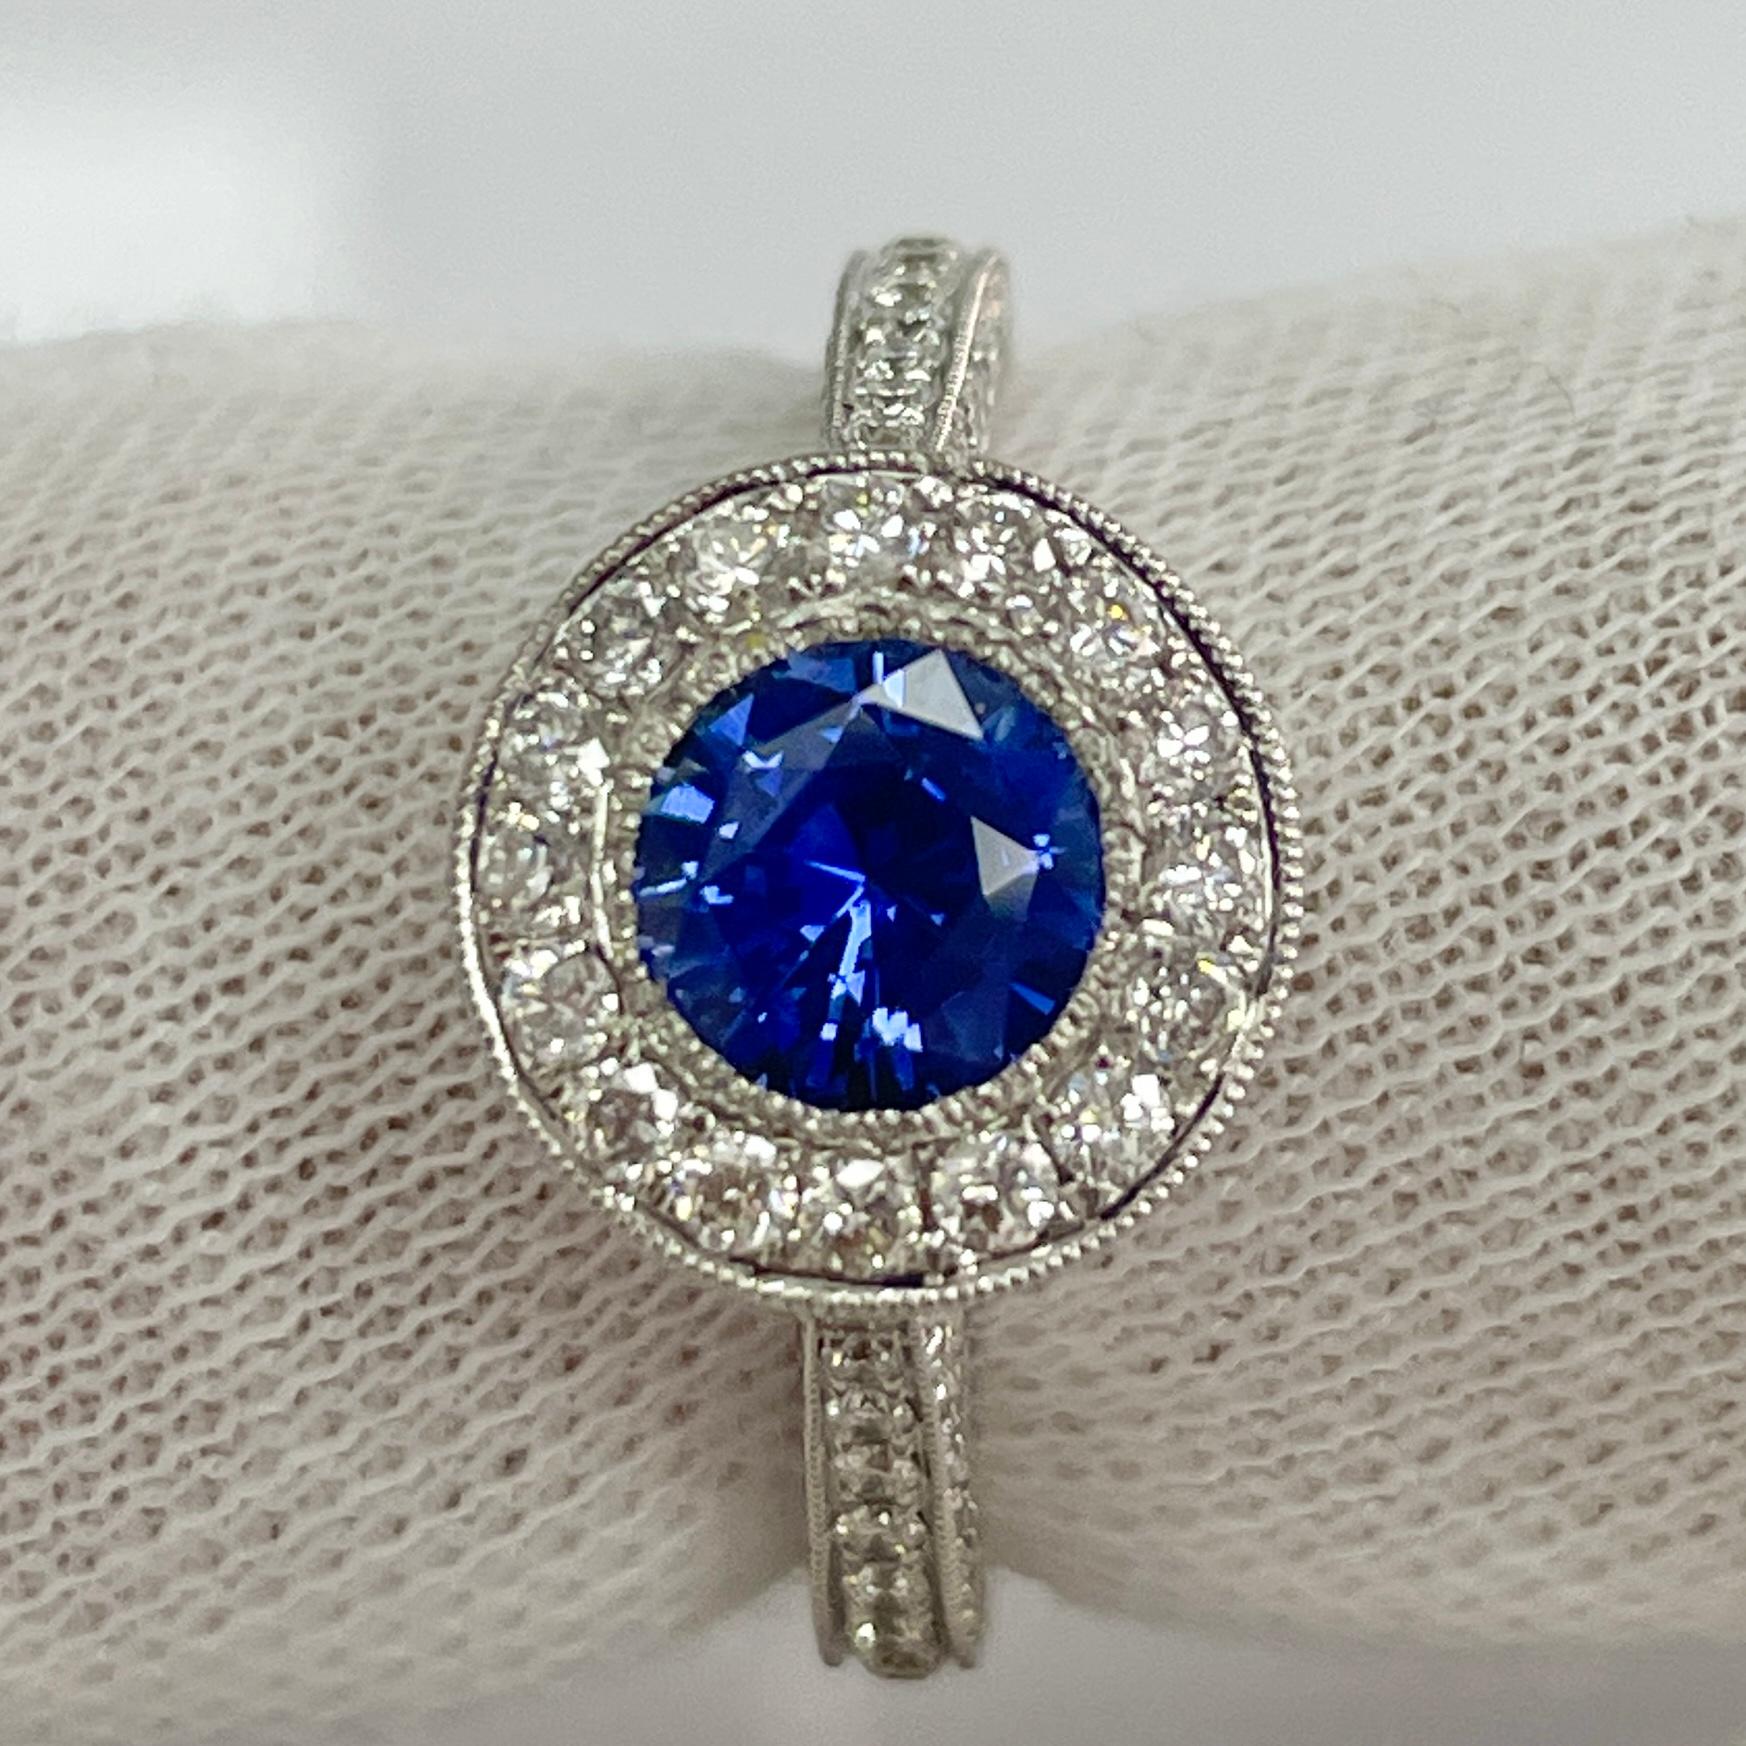 This ring has a soft blue yet very fully saturated and lively sapphire. This ring is very elegant with 18K white gold and 1.05 carats of brilliant white diamonds.